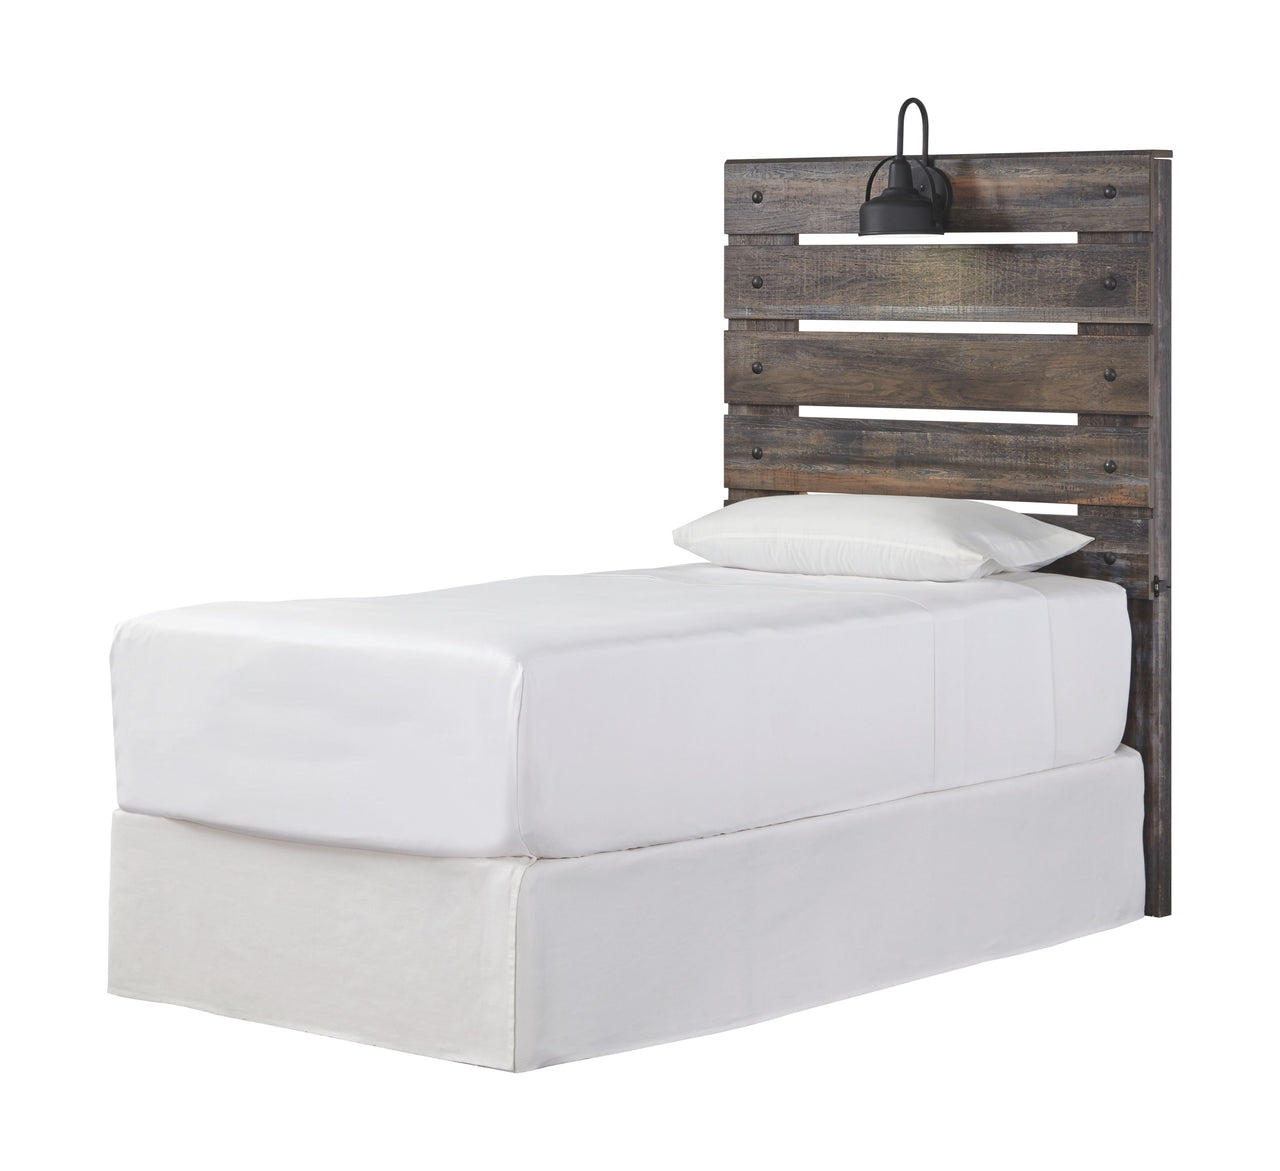 Drystan - Youth Panel Headboard With Bed Frame Tony's Home Furnishings Furniture. Beds. Dressers. Sofas.